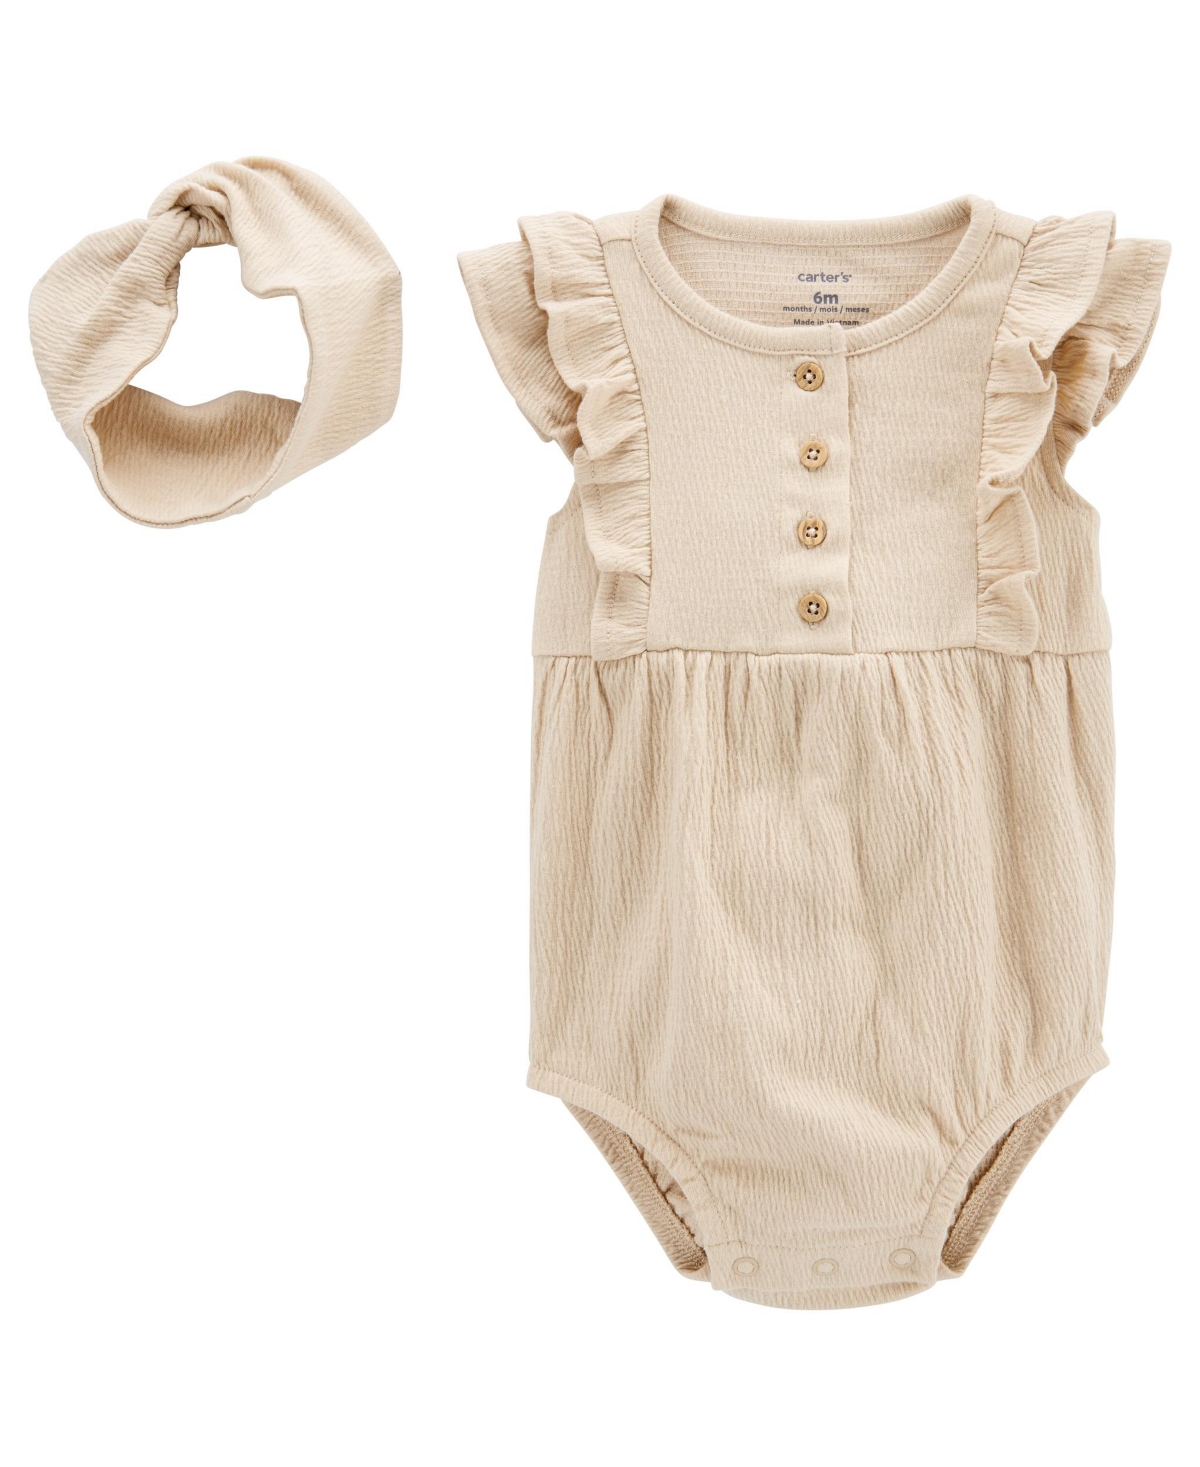 Carter's Baby Girls Button Front Bodysuit And Headwrap, 2 Piece Set In Tan